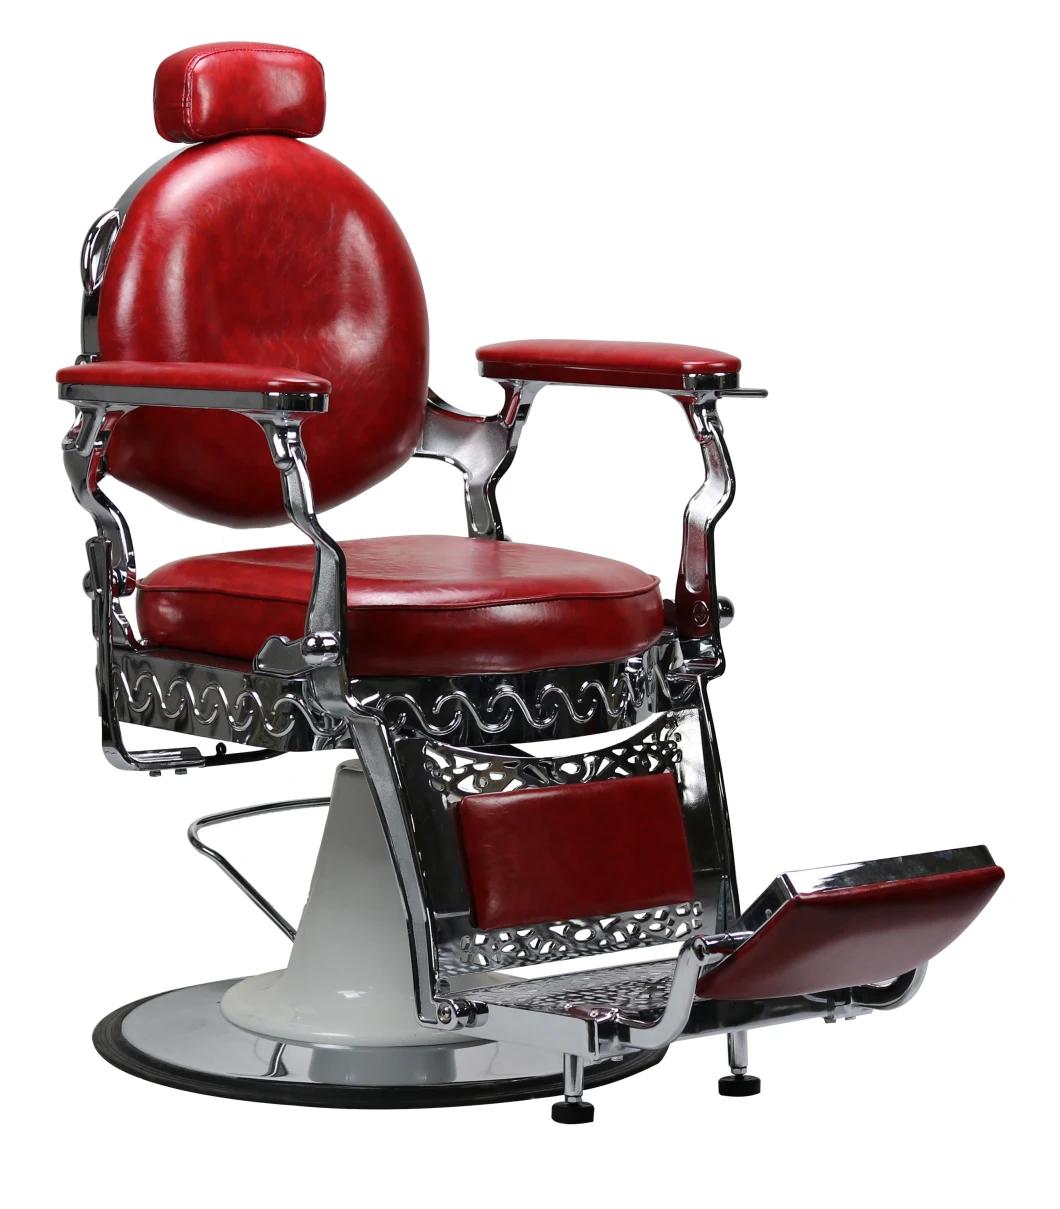 Hl- 9259b Salon Barber Chair for Man or Woman with Stainless Steel Armrest and Aluminum Pedal